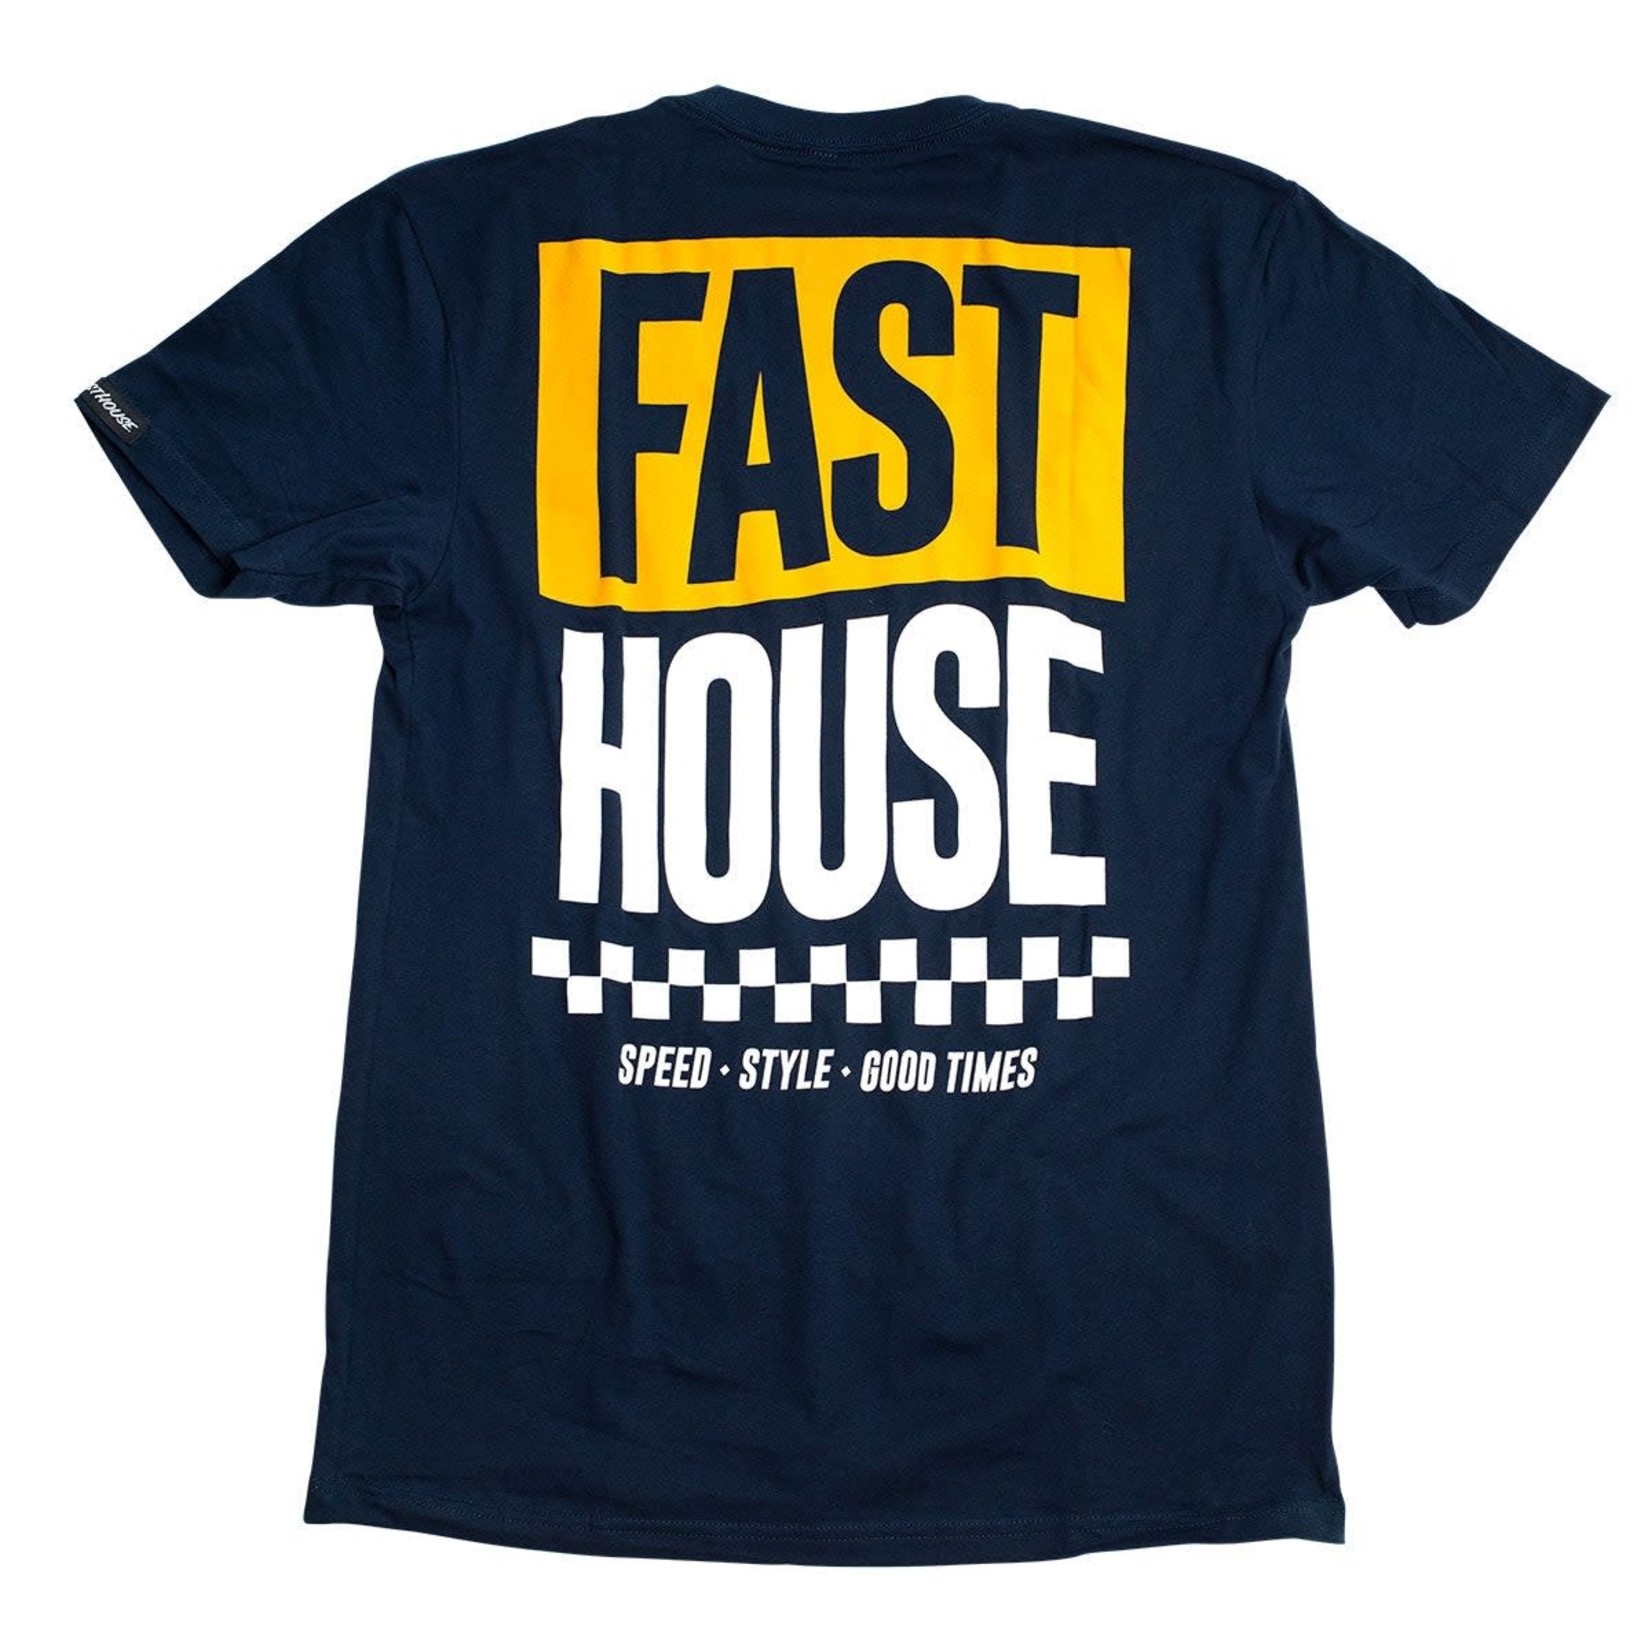 FASTHOUSE Banner Tee